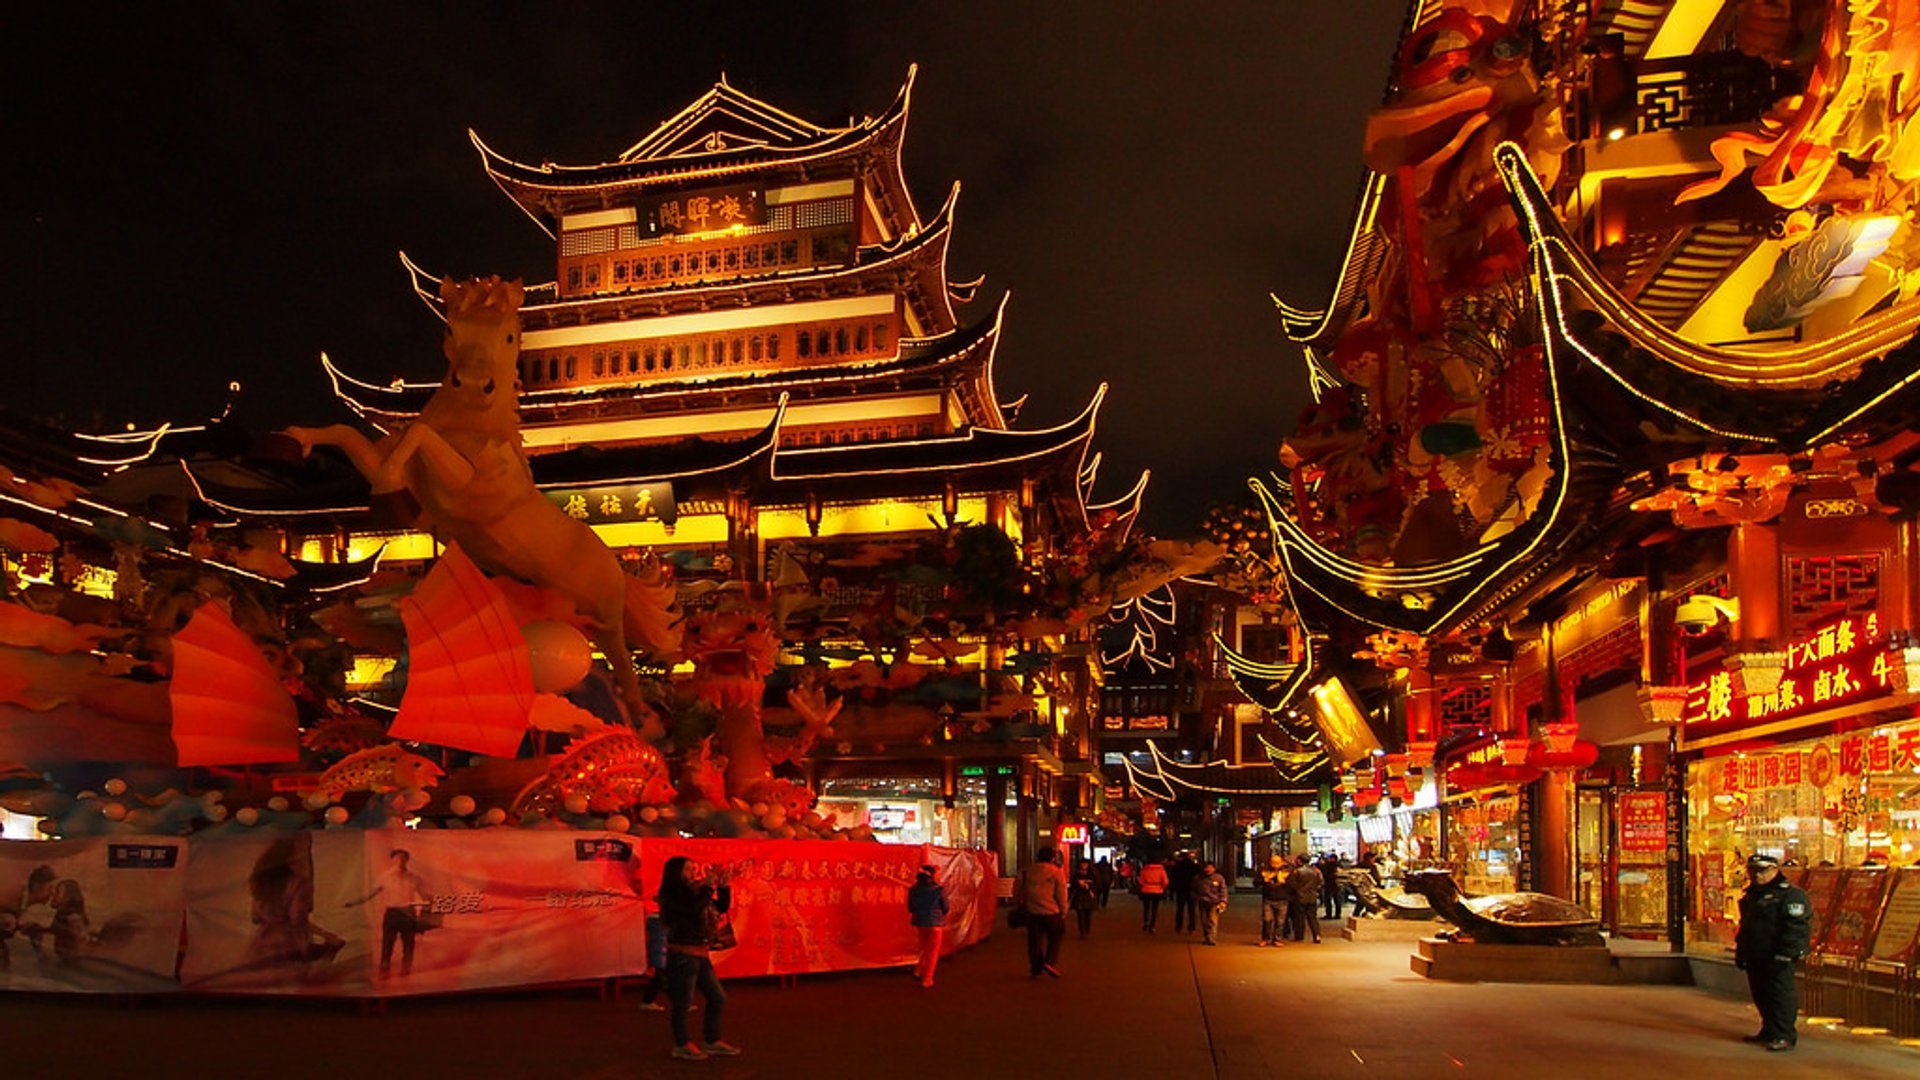 Spring Festival or Chinese New Year 2023 in Shanghai